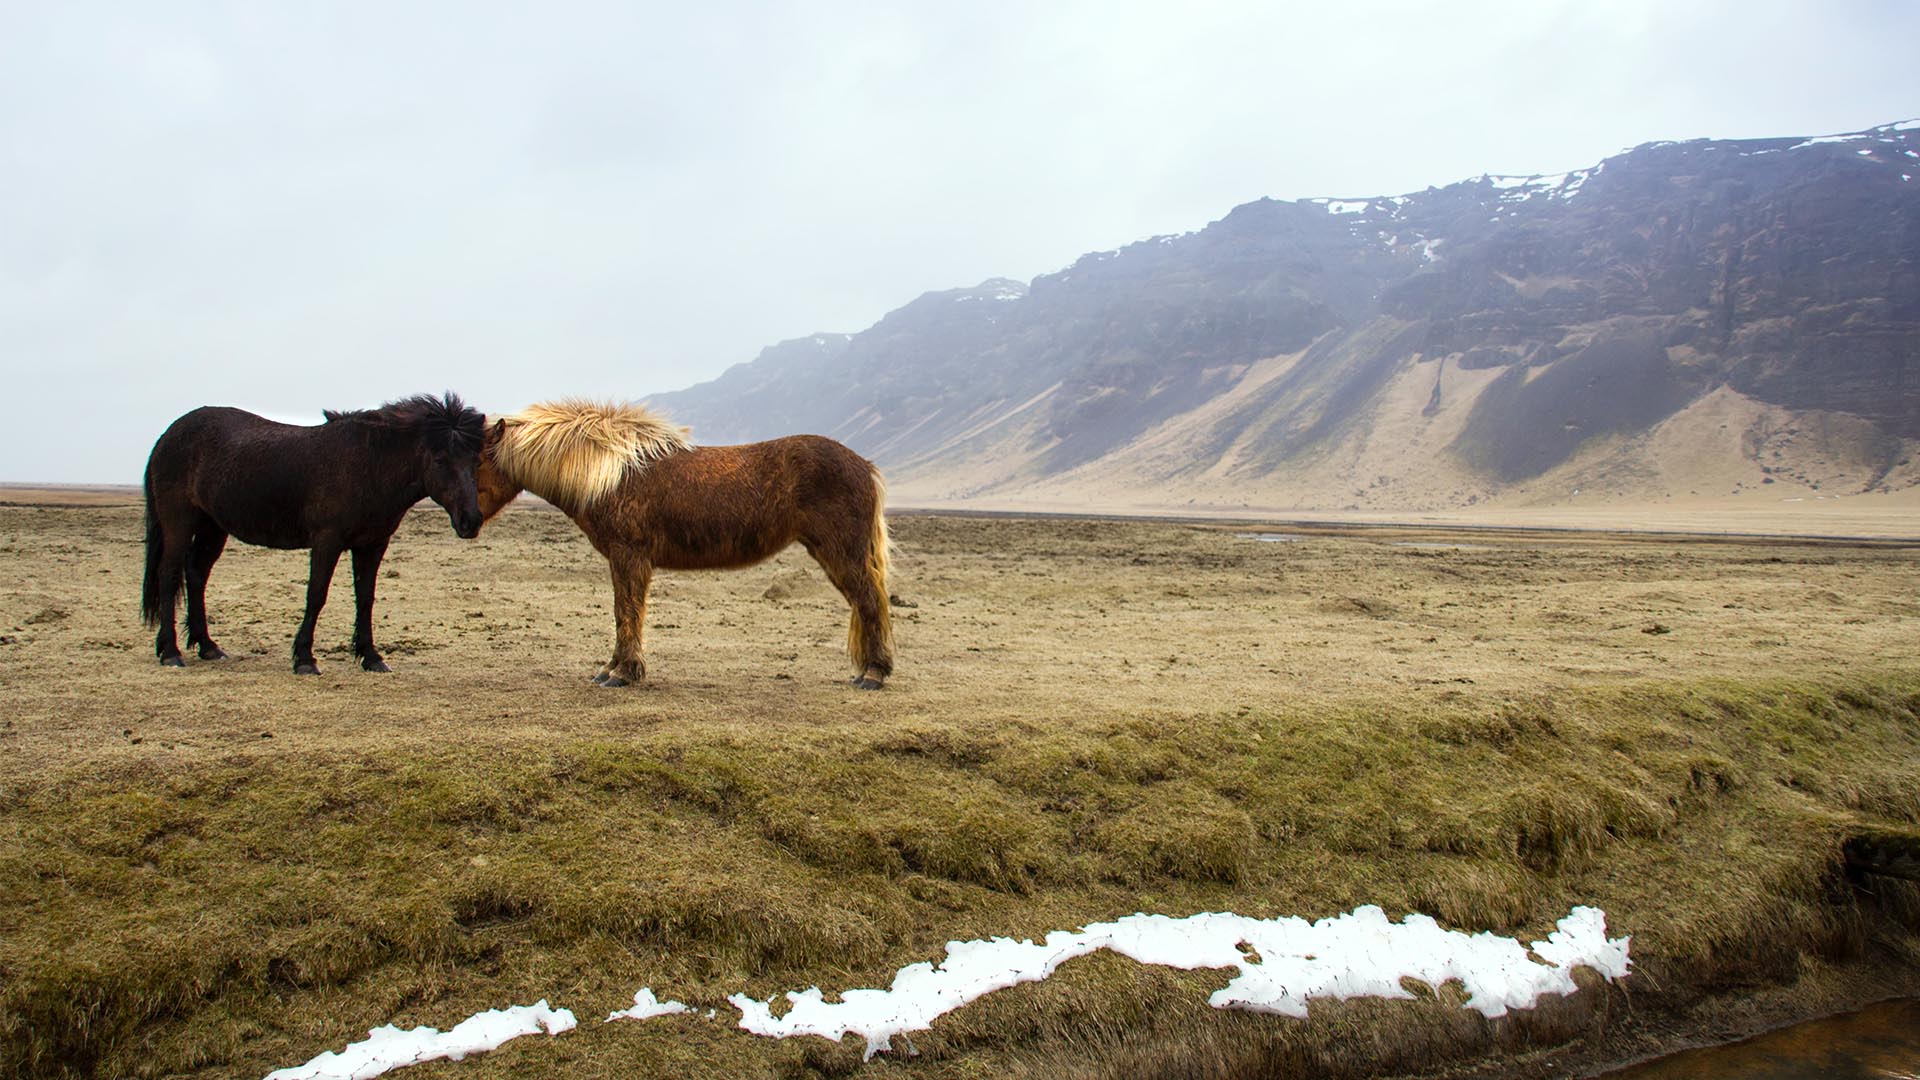 Send your loved one kisses from Iceland this Valentine’s Day